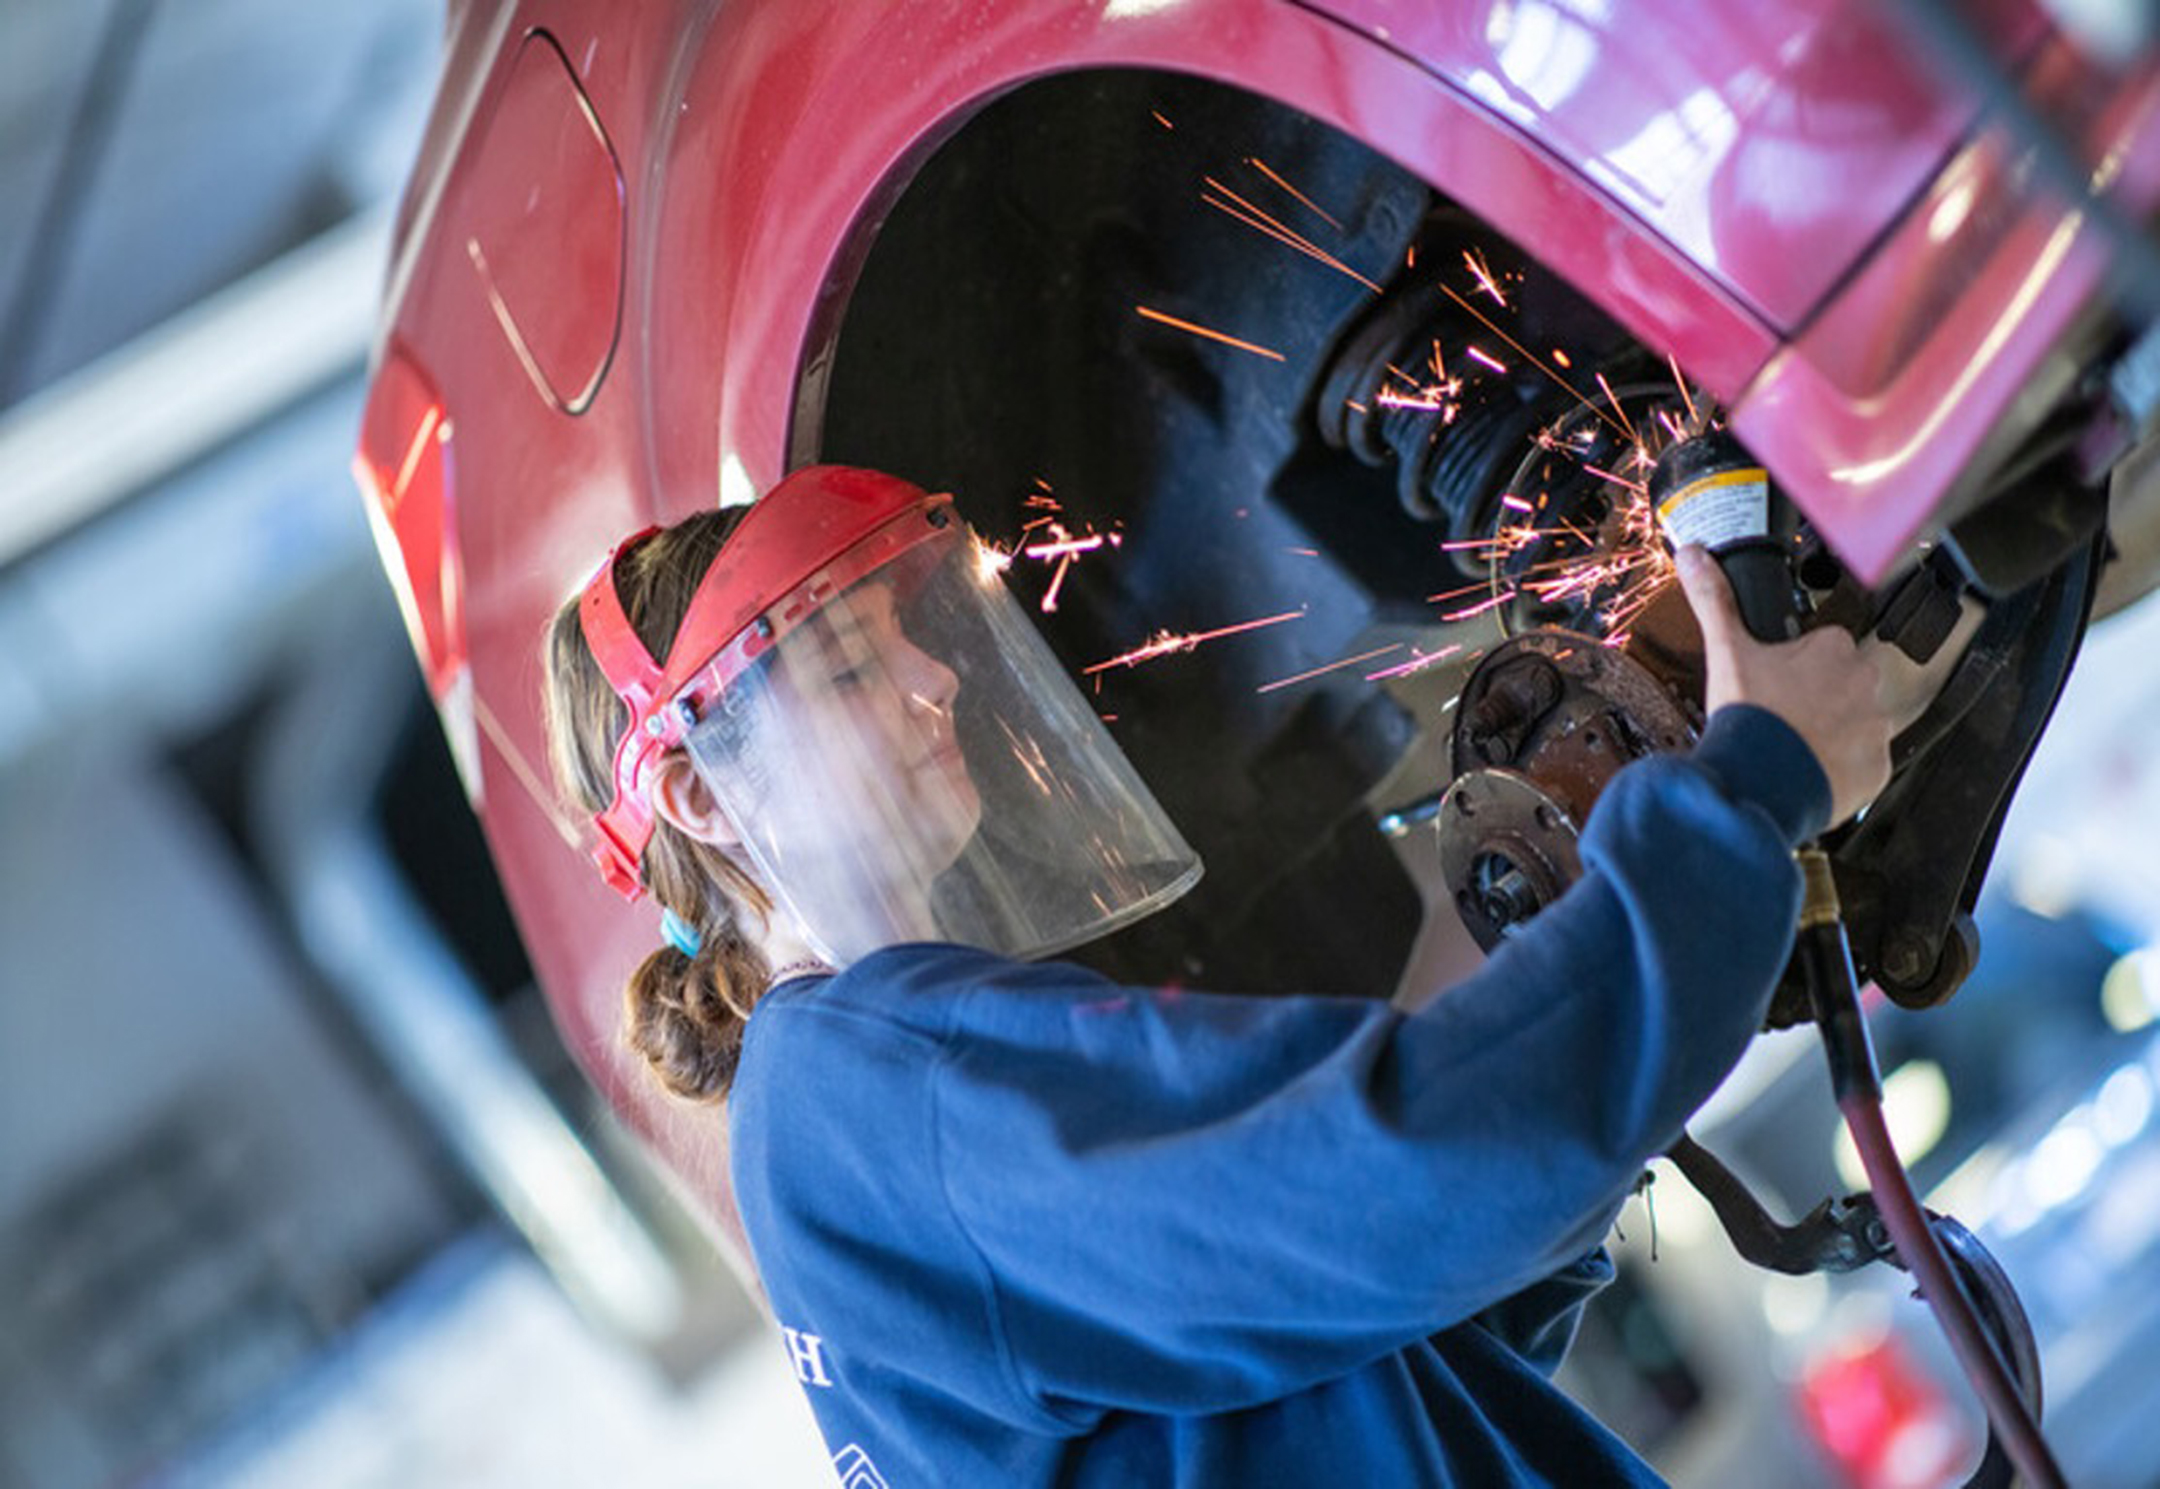 Female high school student wearing a hard hat and plastic face shield using a grinder on a car wheel, creating sparks